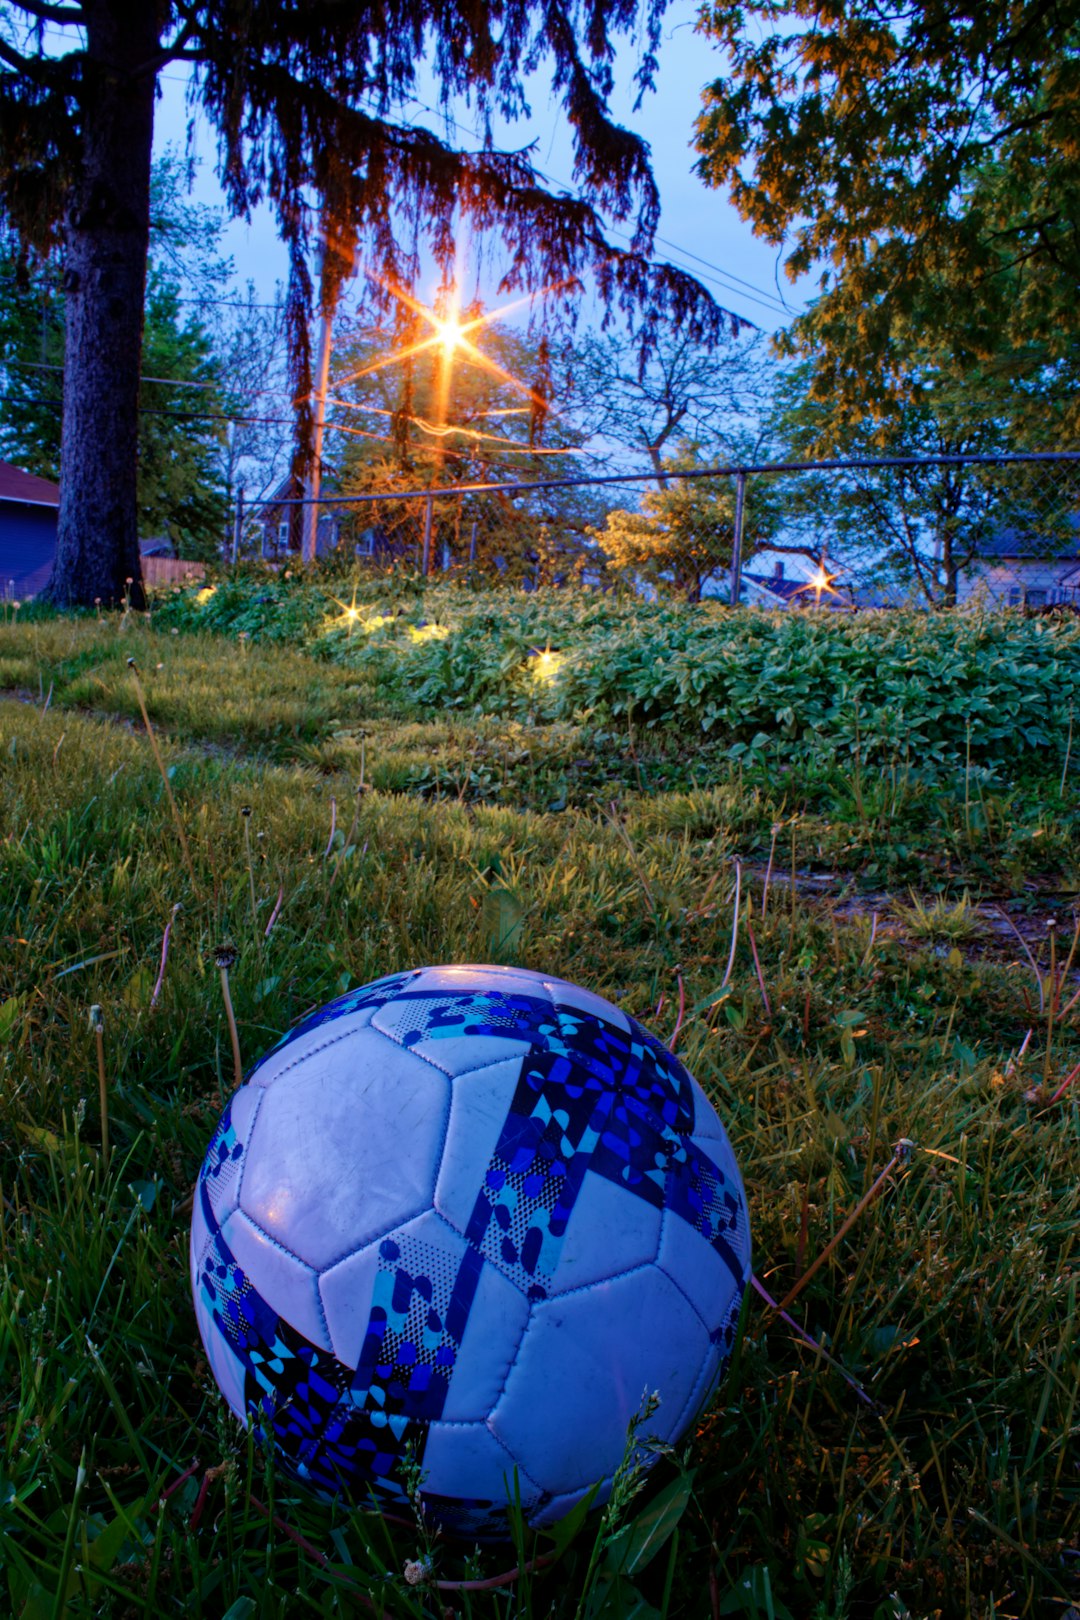 white and black soccer ball on green grass field during sunset